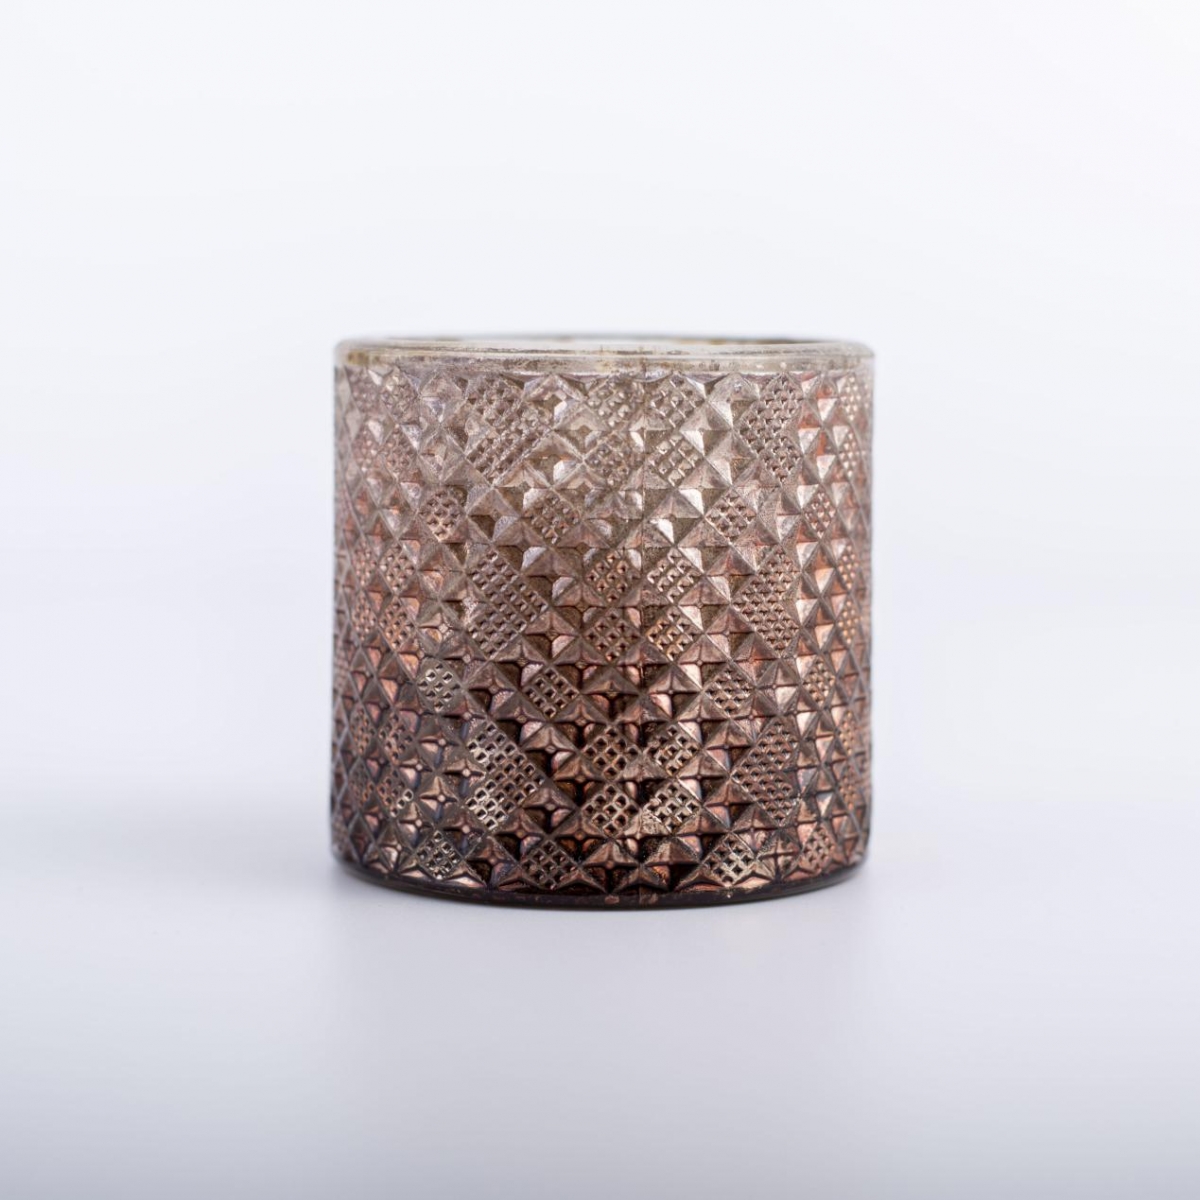 Retro Candles -Gold Gradient Brown ,Soy Wax ,Scented Candles ,Cube Embossed Glass Jar ,China Factory ,Price-HOWCANDLE-Candles,Scented Candles,Aromatherapy Candles,Soy Candles,Vegan Candles,Jar Candles,Pillar Candles,Candle Gift Sets,Essential Oils,Reed Diffuser,Candle Holder,